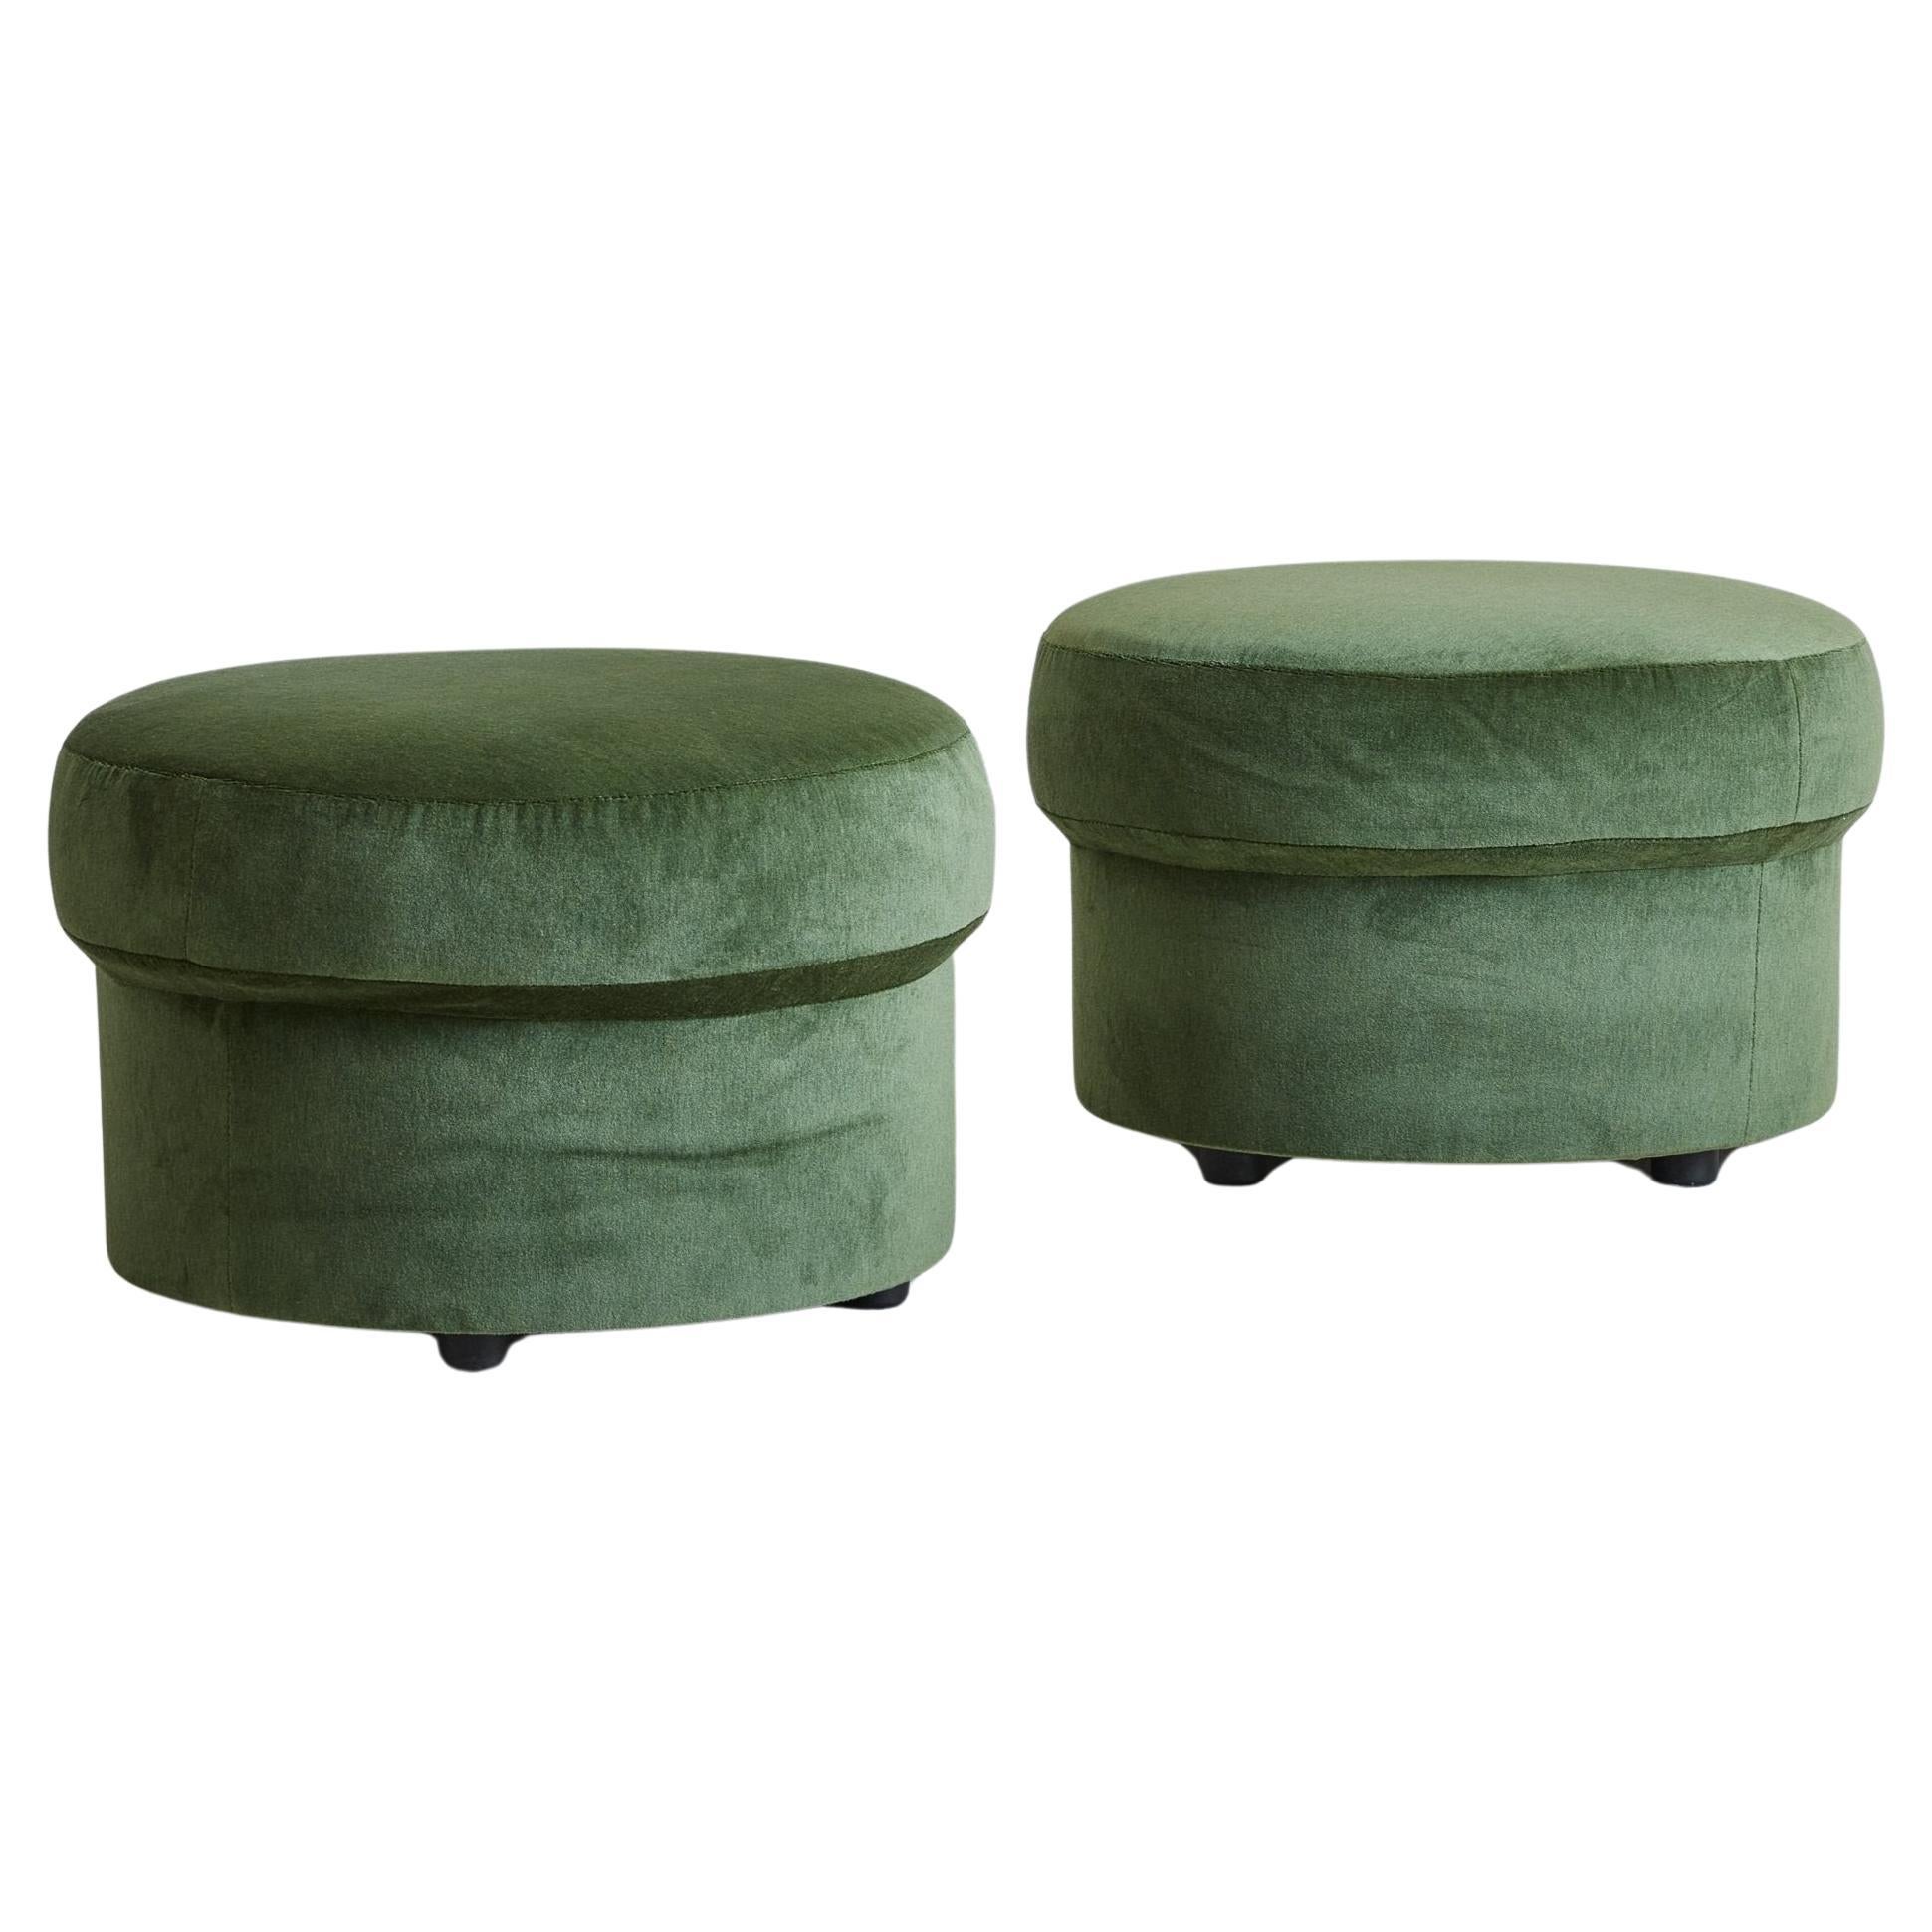 Pair of Round Ottomans in Sage Green Velvet, France 1960s For Sale